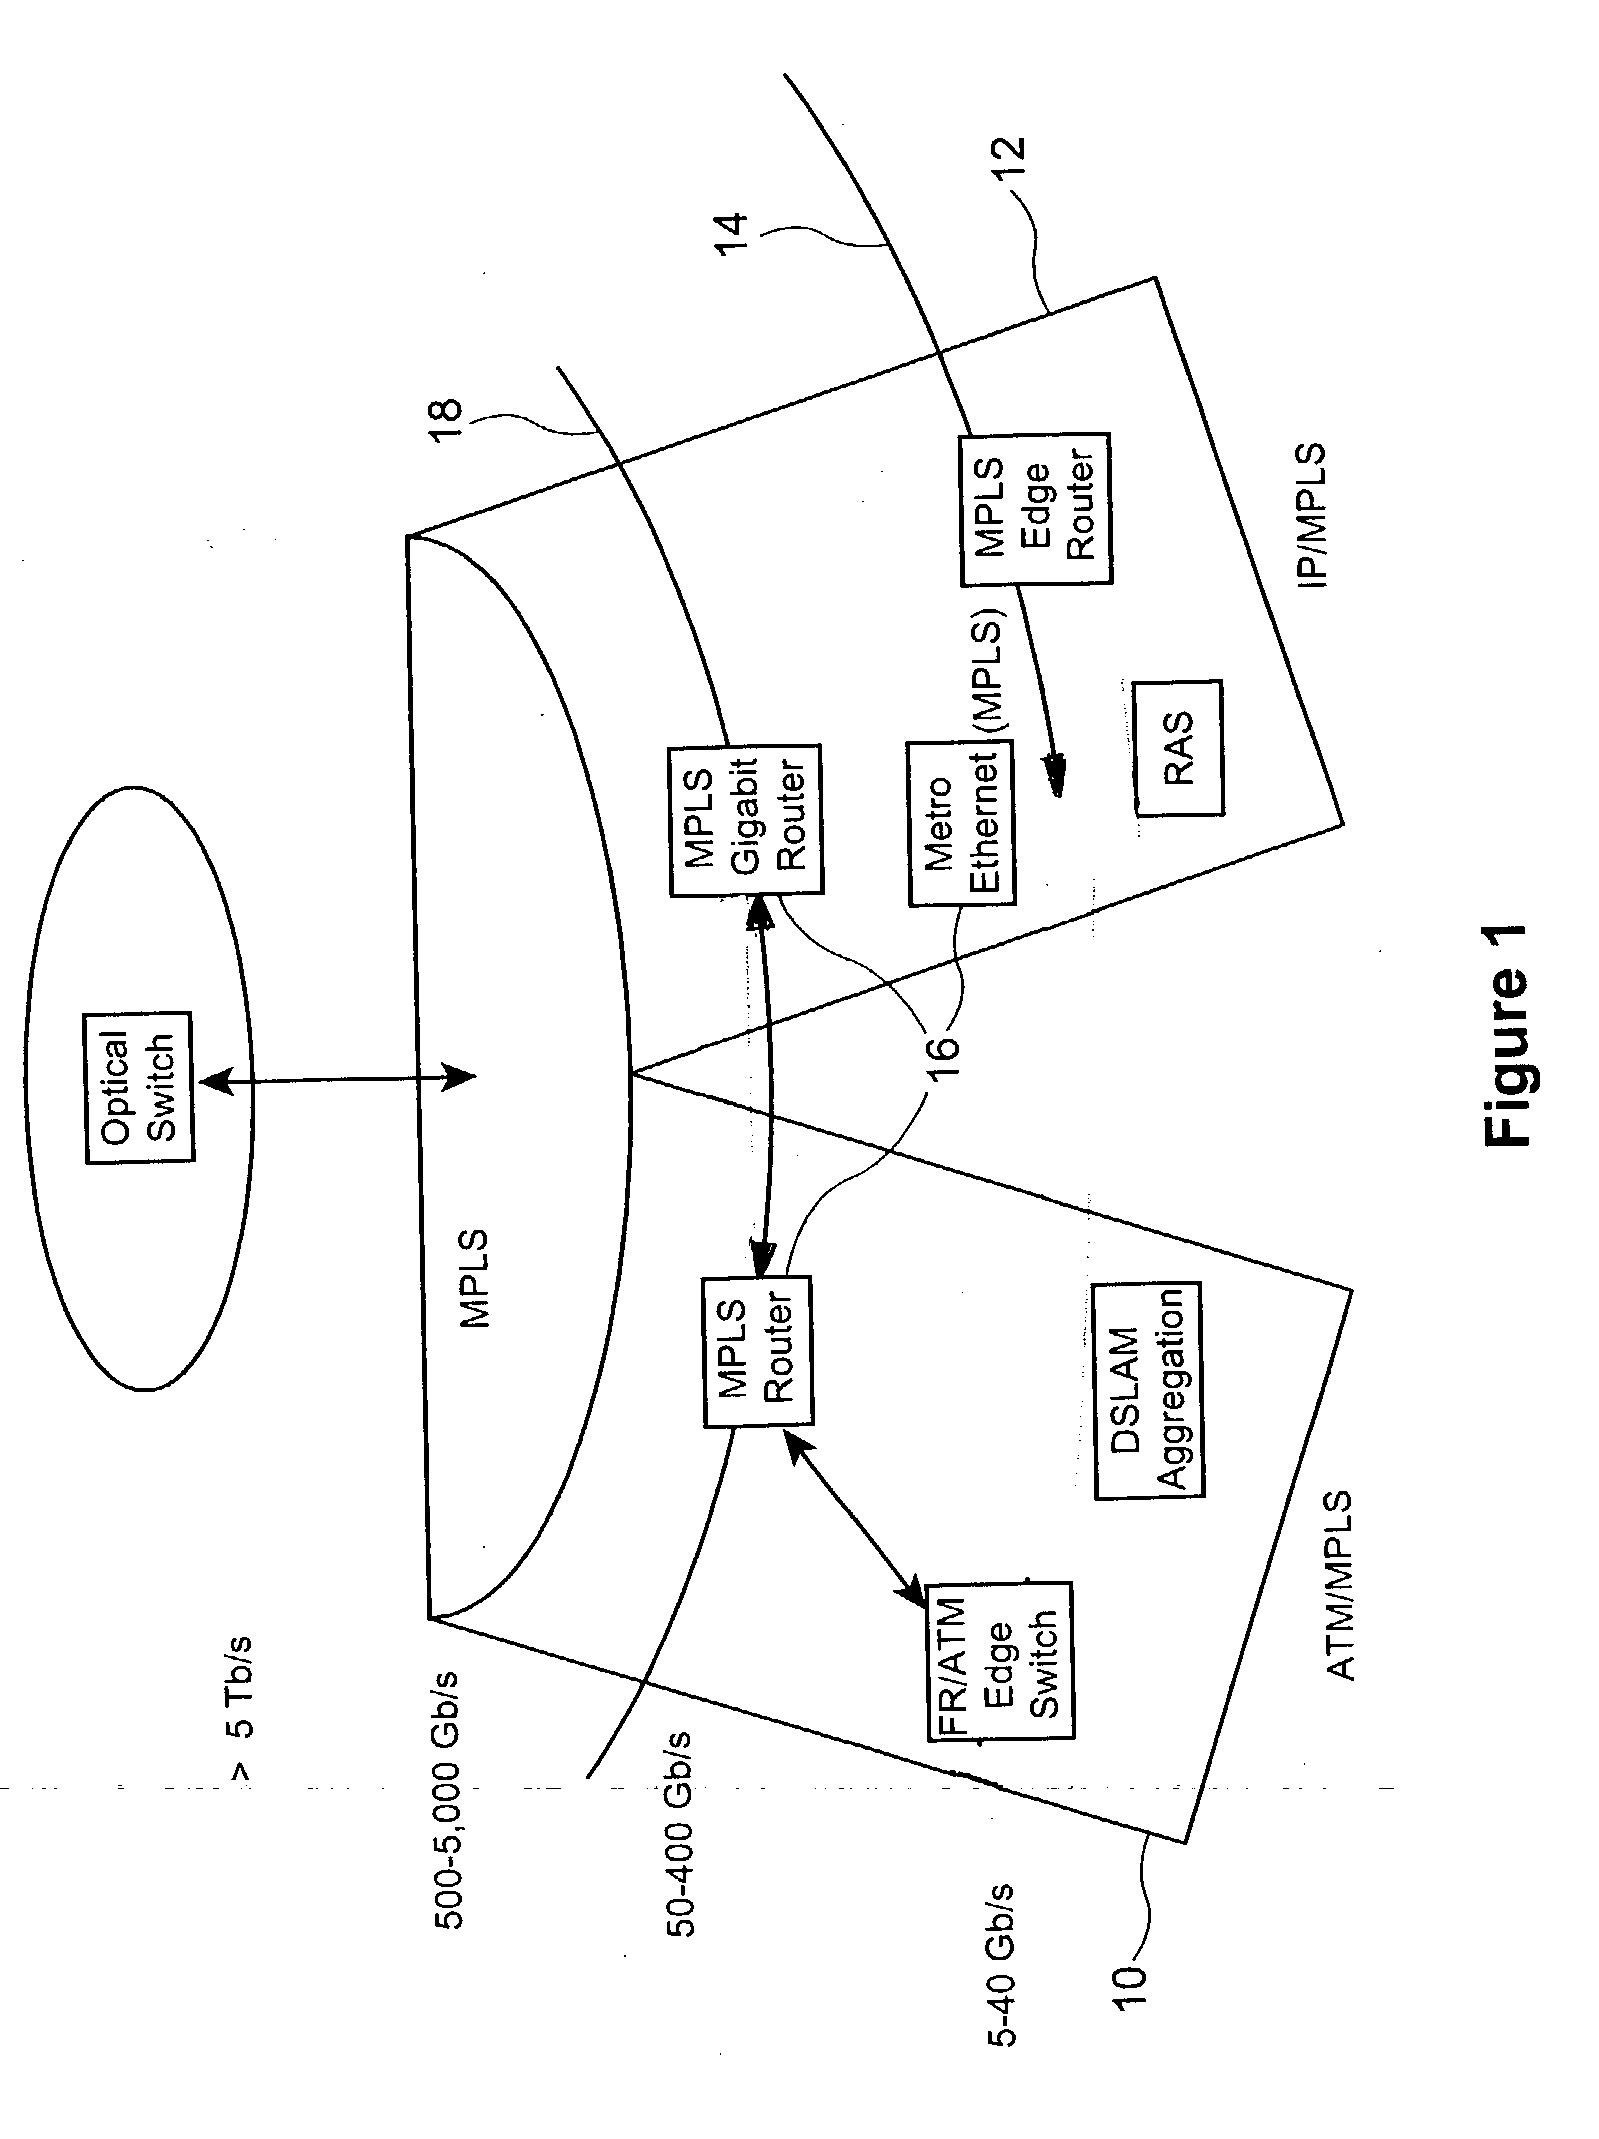 System and method of downloading data for a communication switch